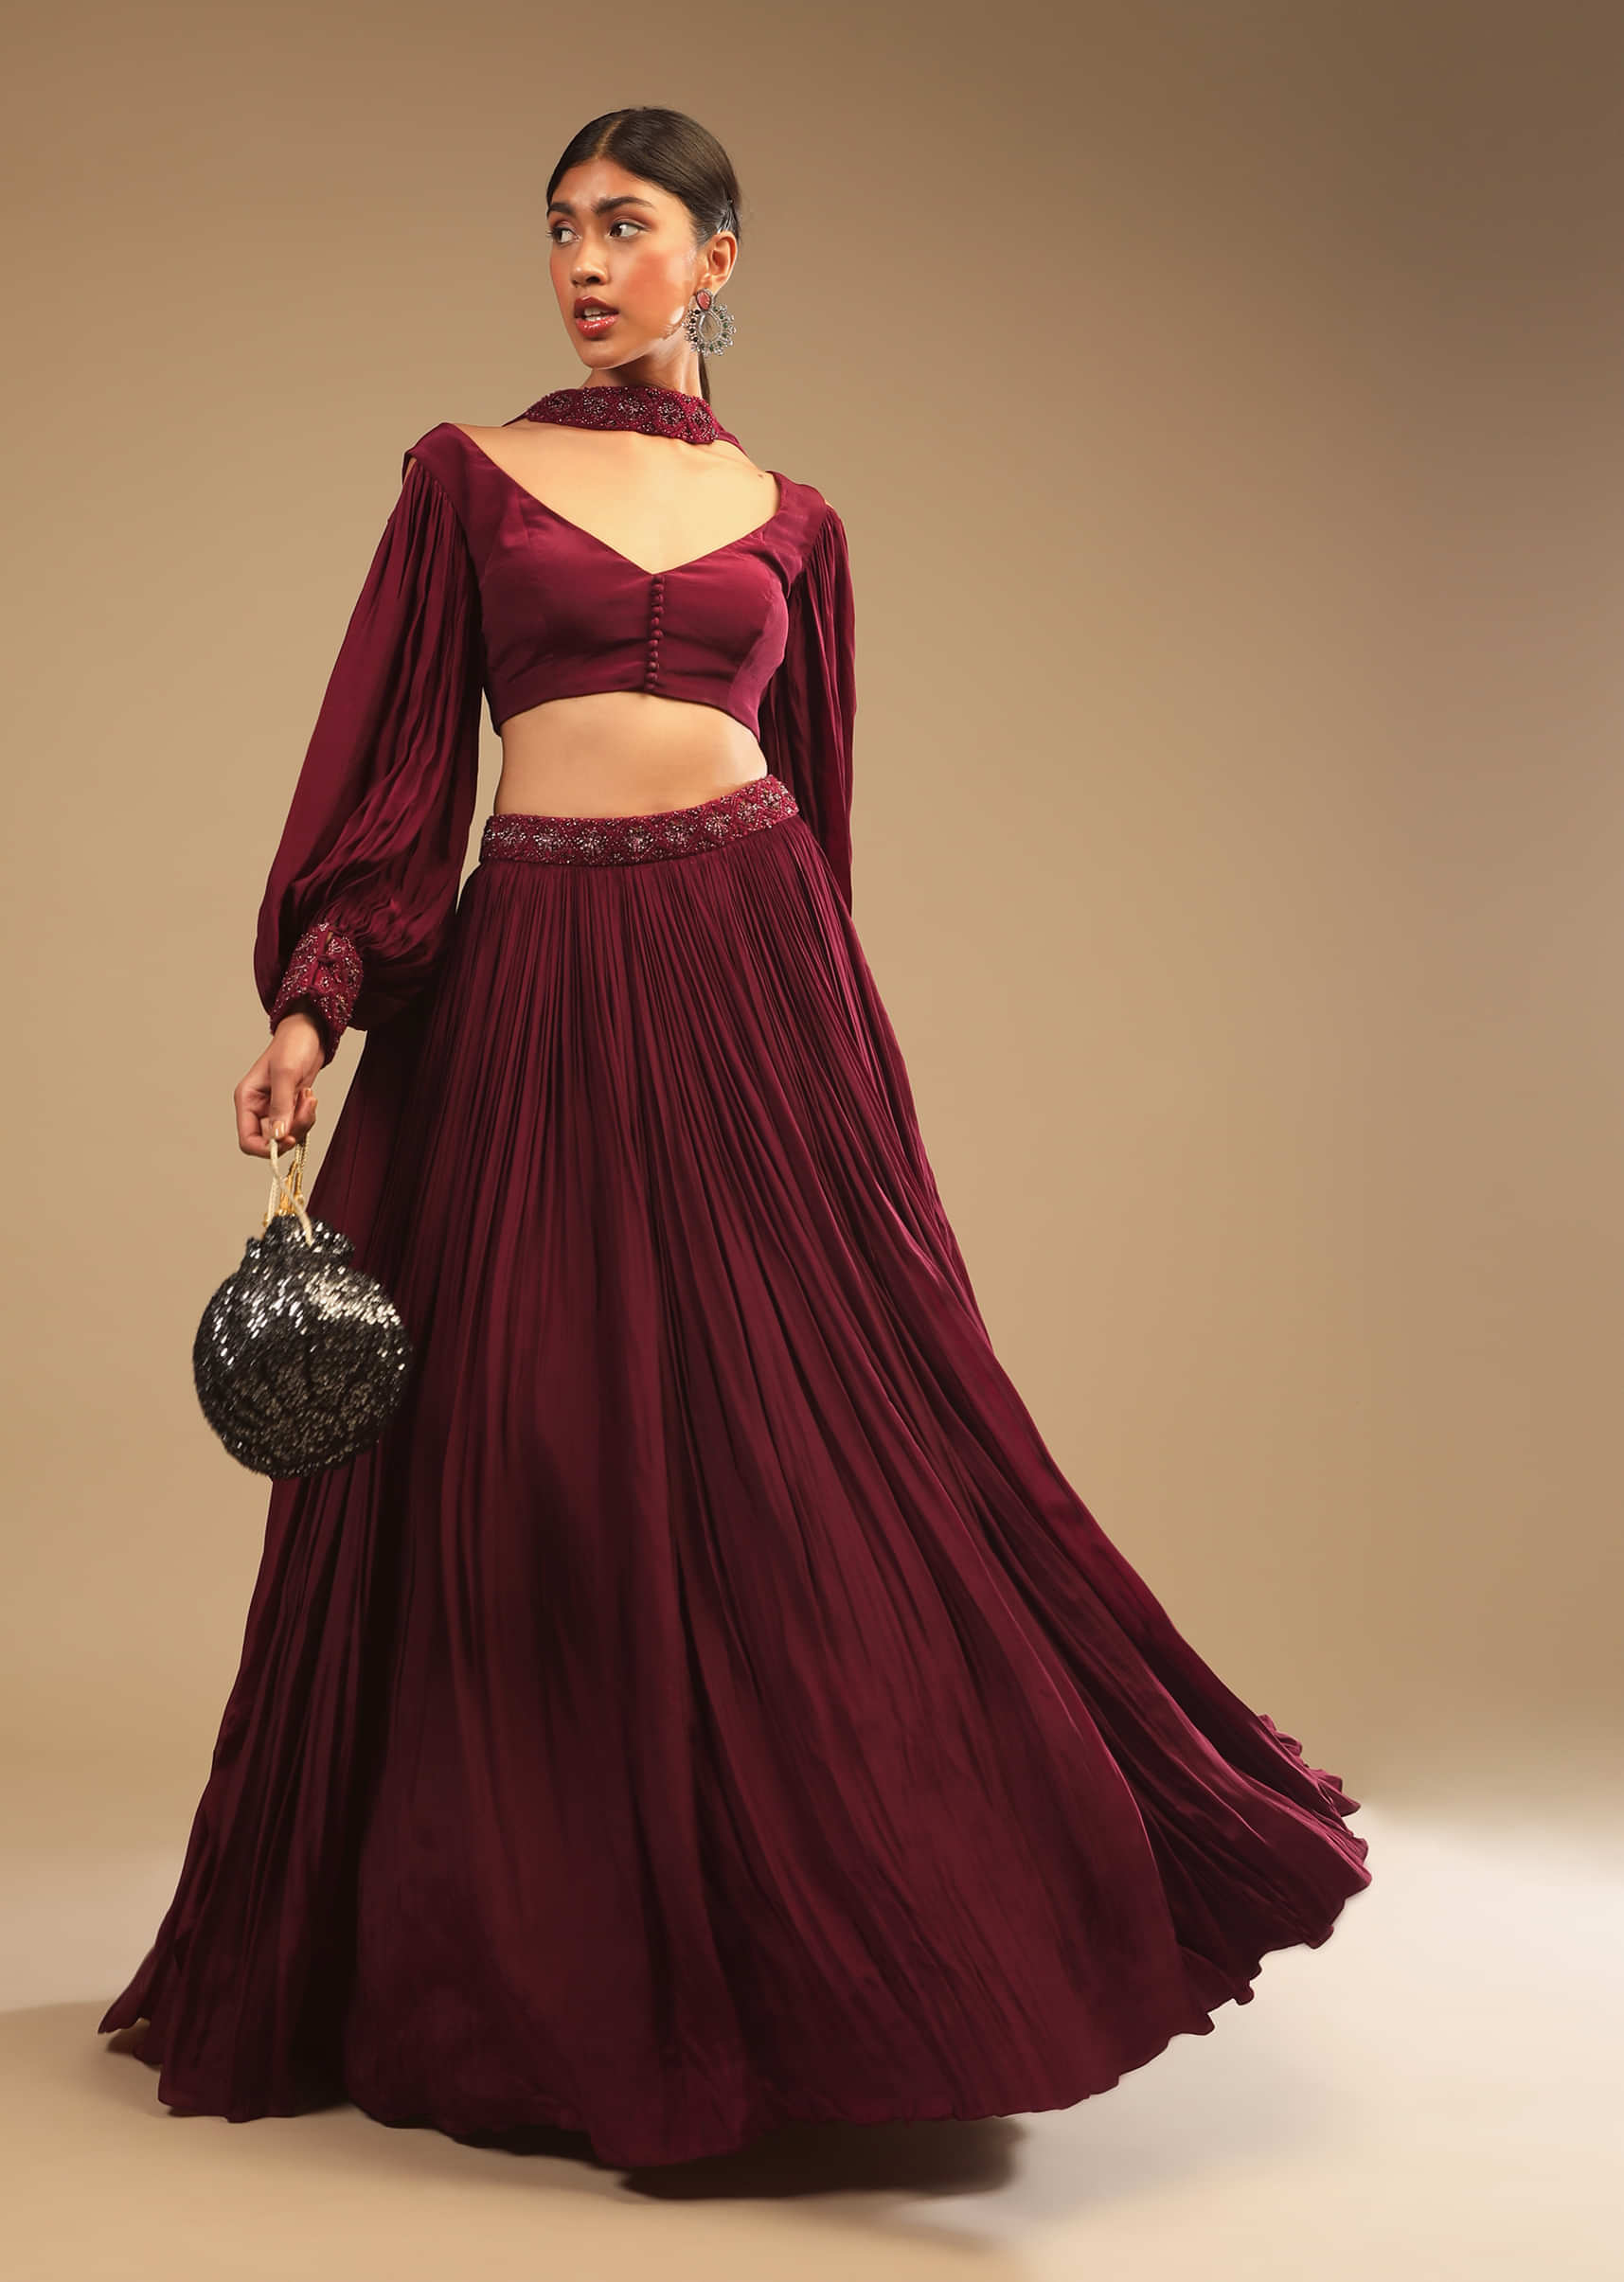 Maroon Lehenga In Crepe With Embroidery Detailing On The Waist And Bishop Sleeved Crop Top 